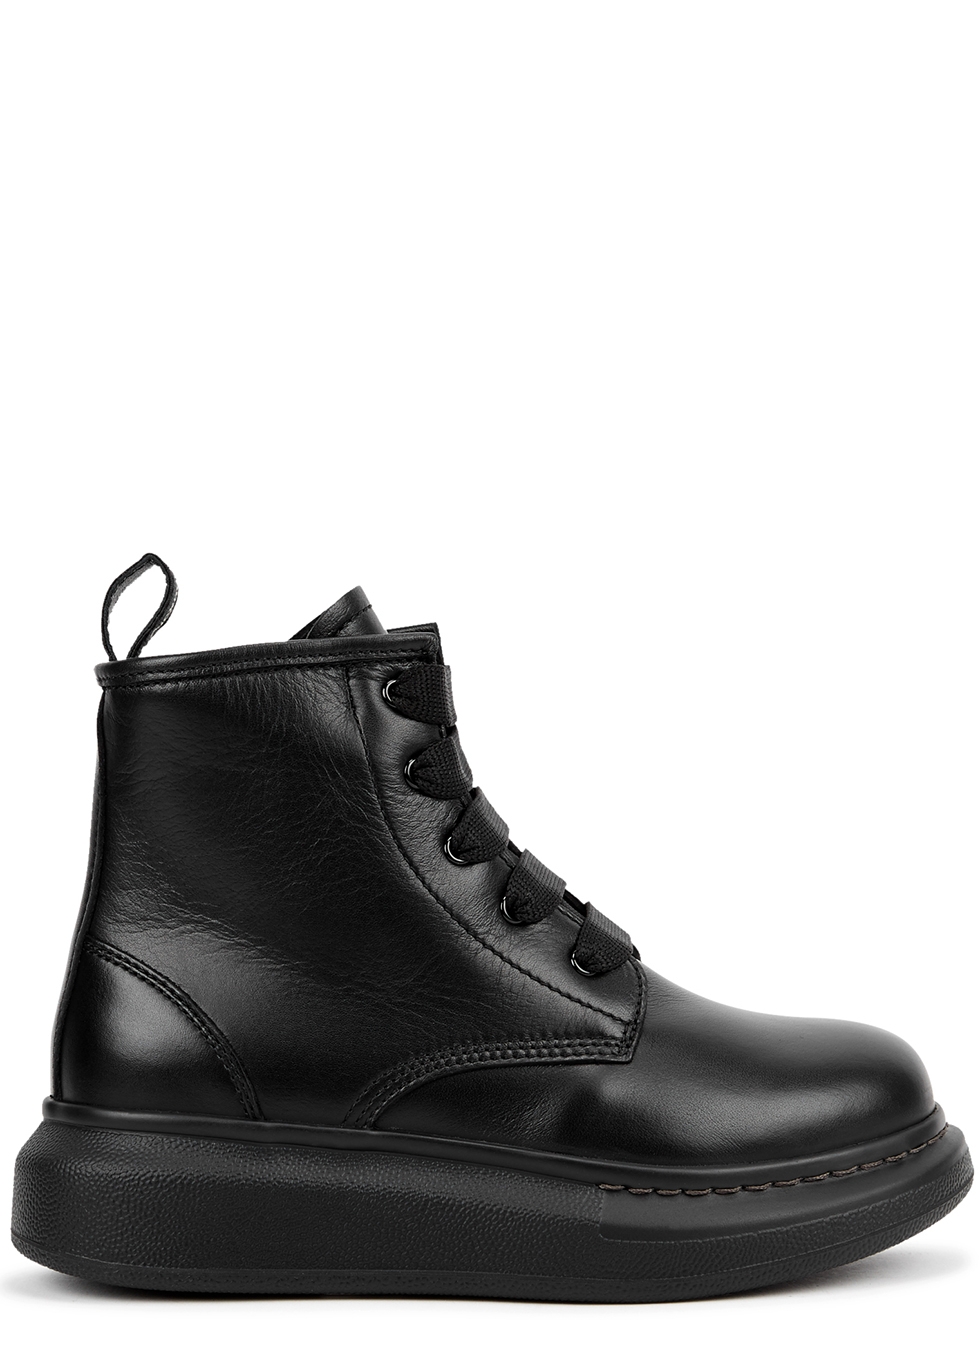 KIDS Black leather boots